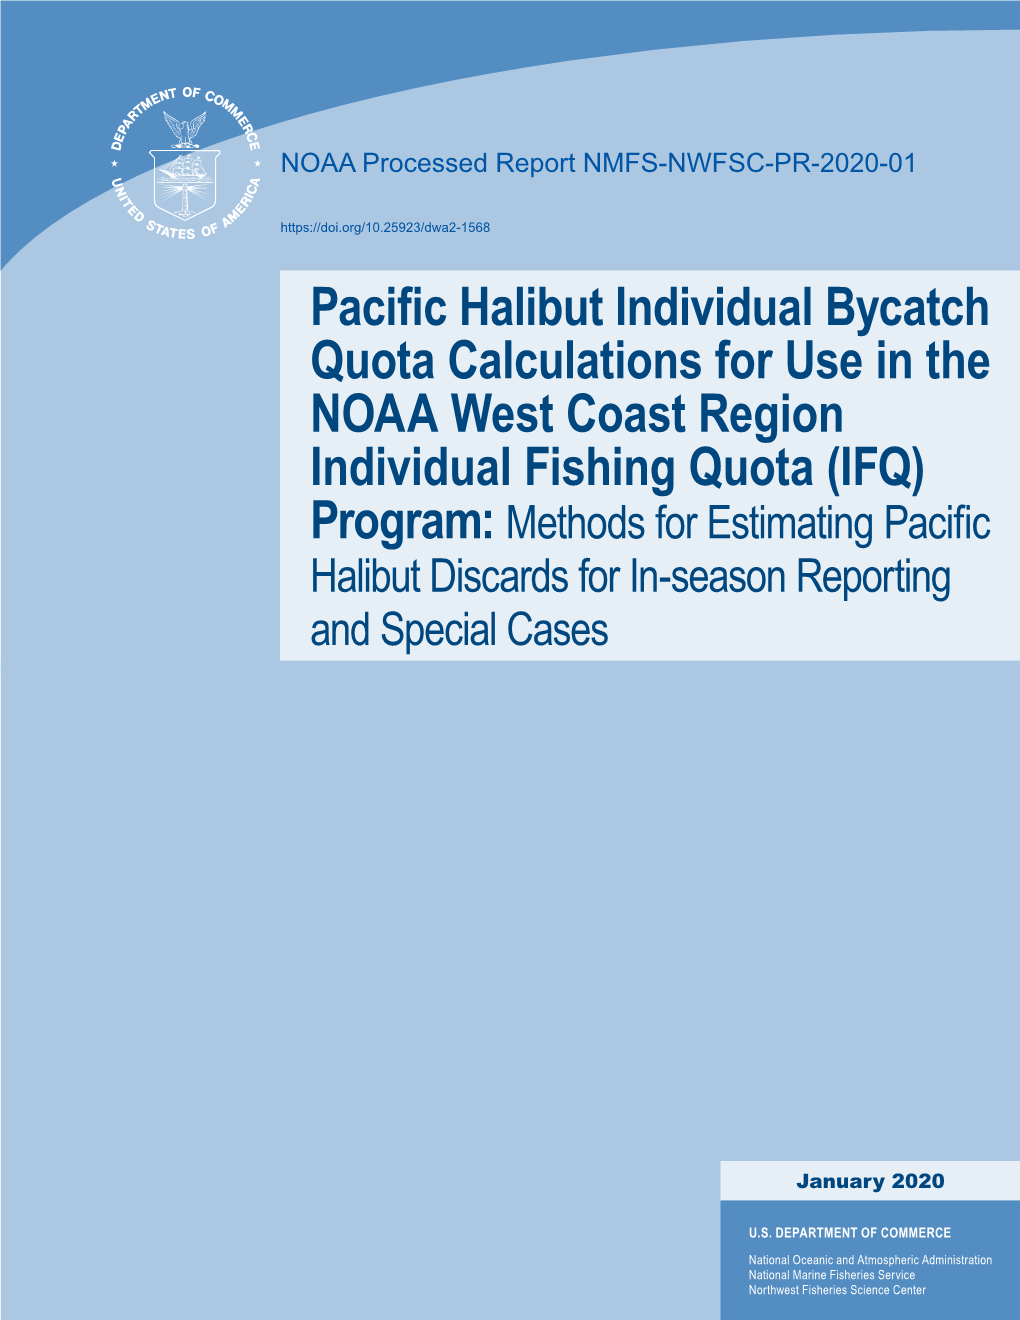 Pacific Halibut Individual Bycatch Quota Calculations for Use in The